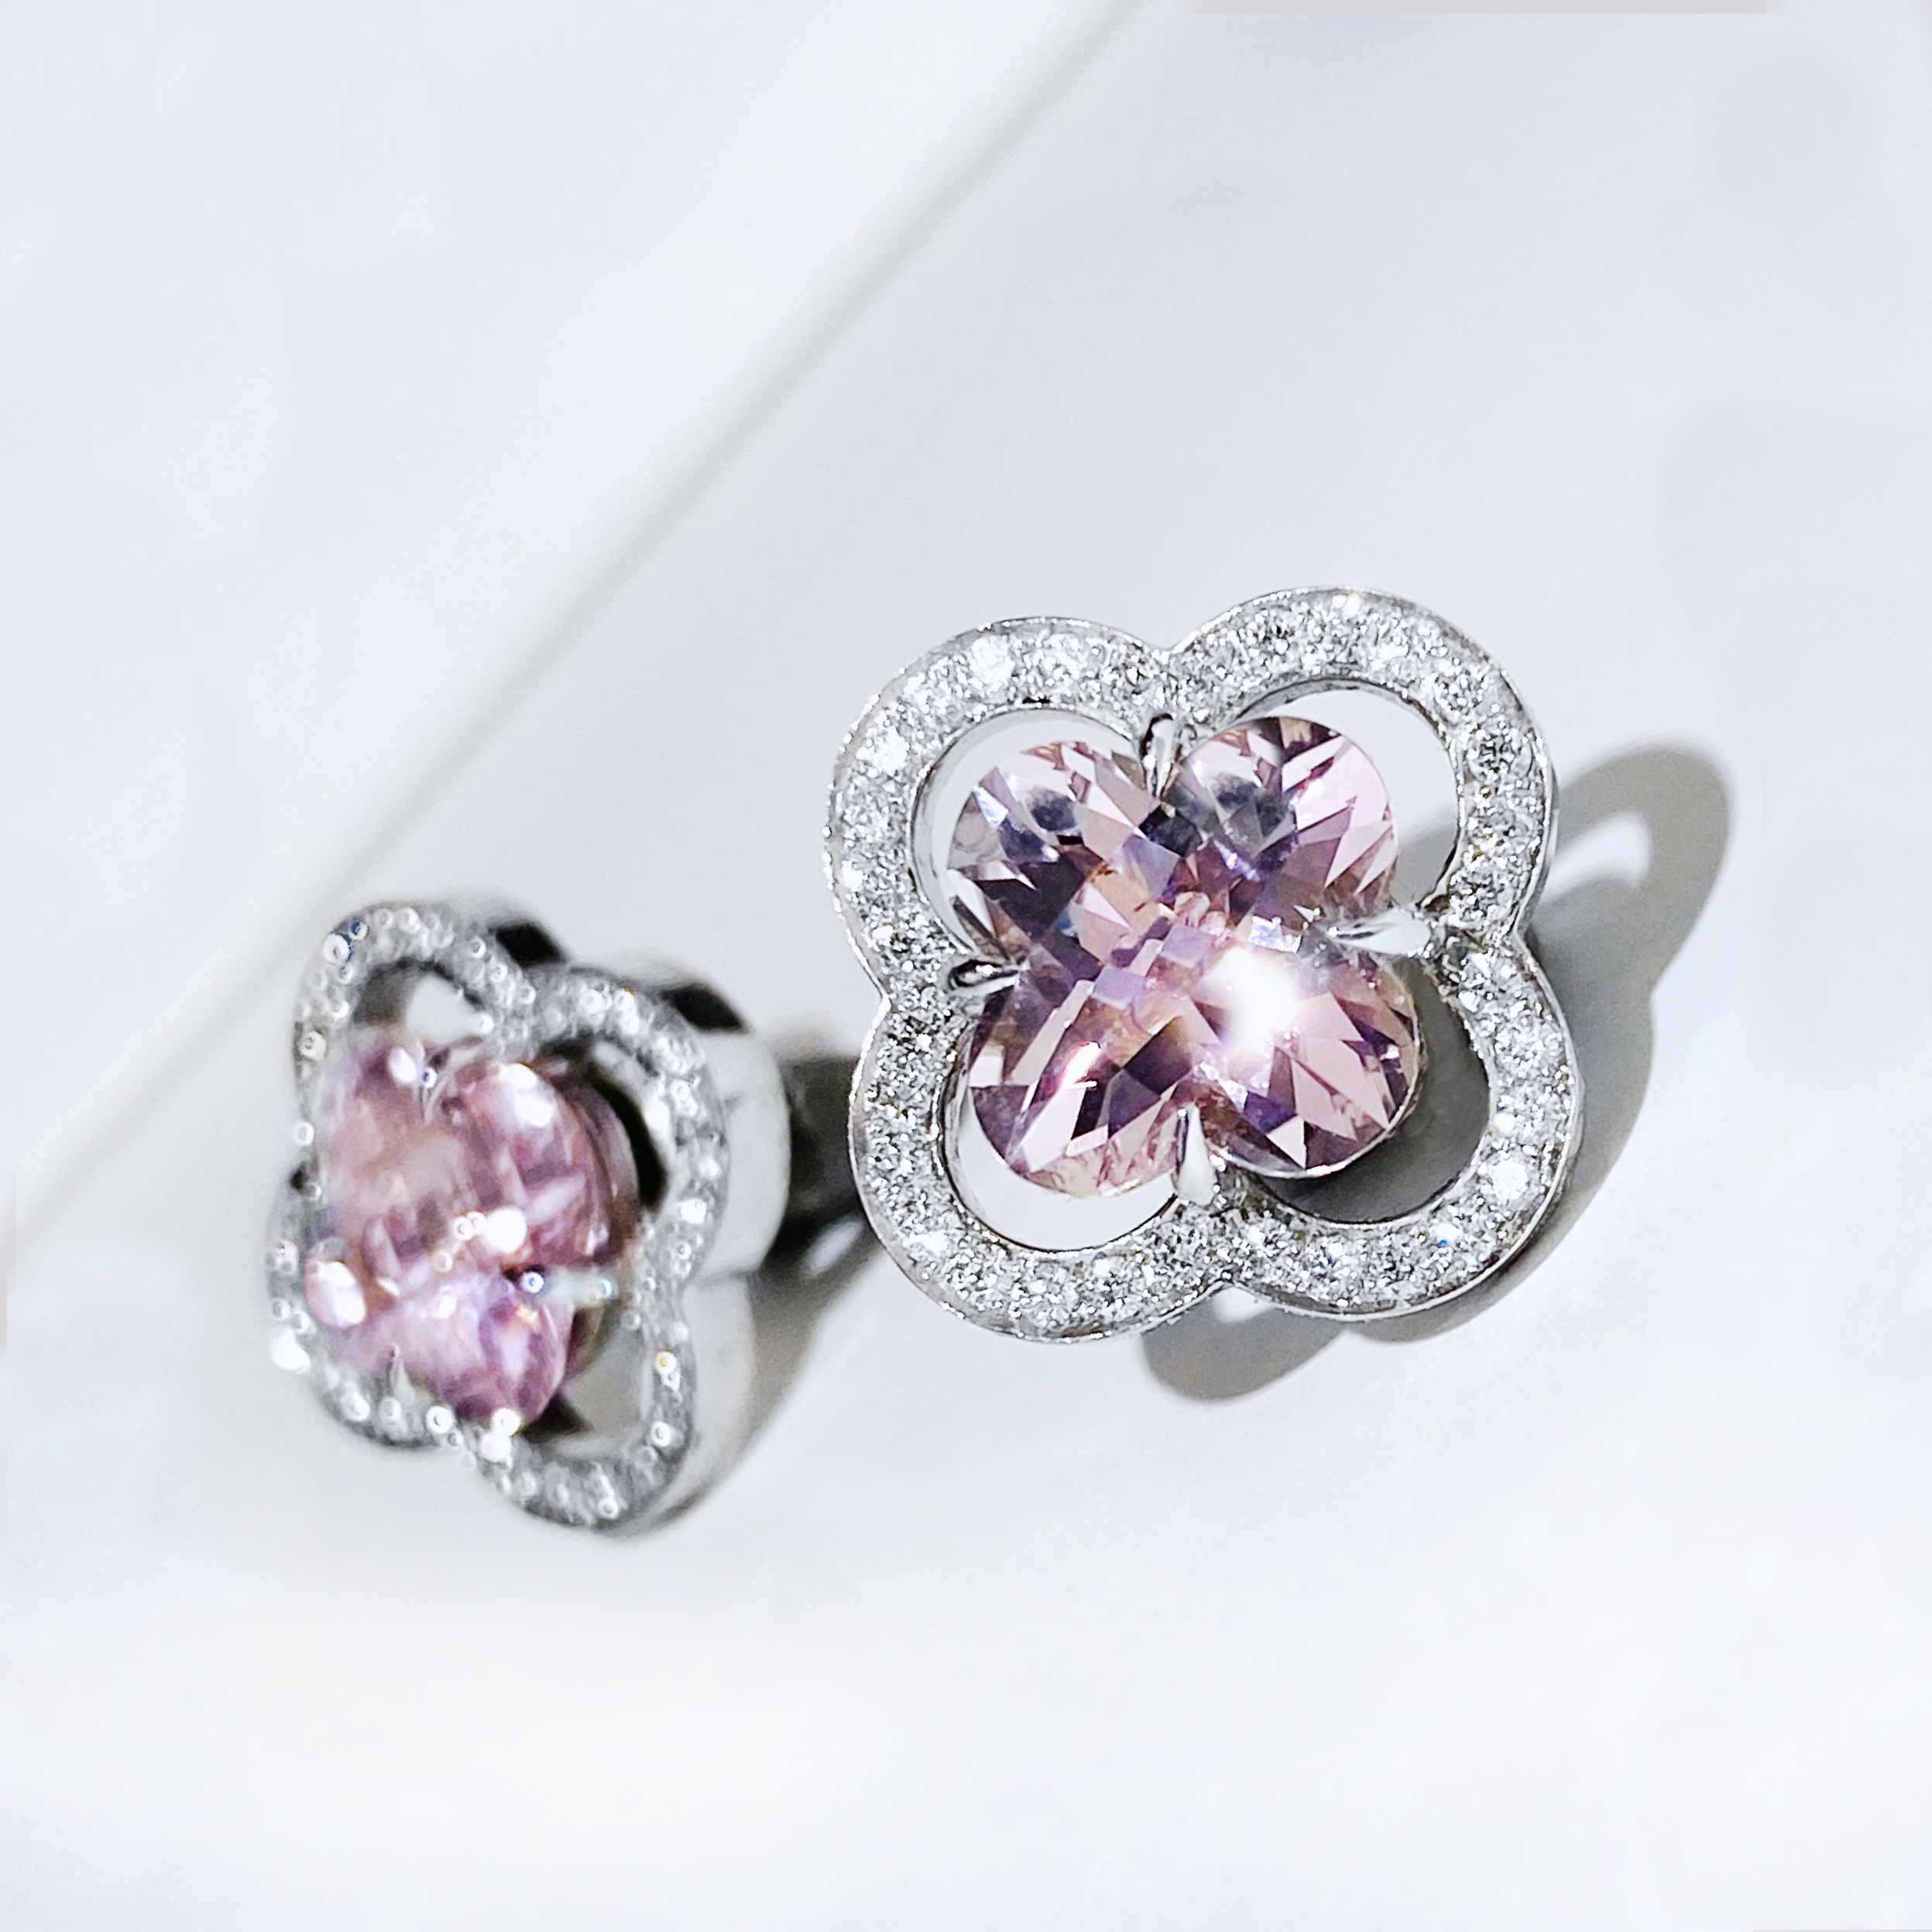 CLOVER CUT MORGANITE AND DIAMOND EARRINGS IN WHITE GOLD 8900